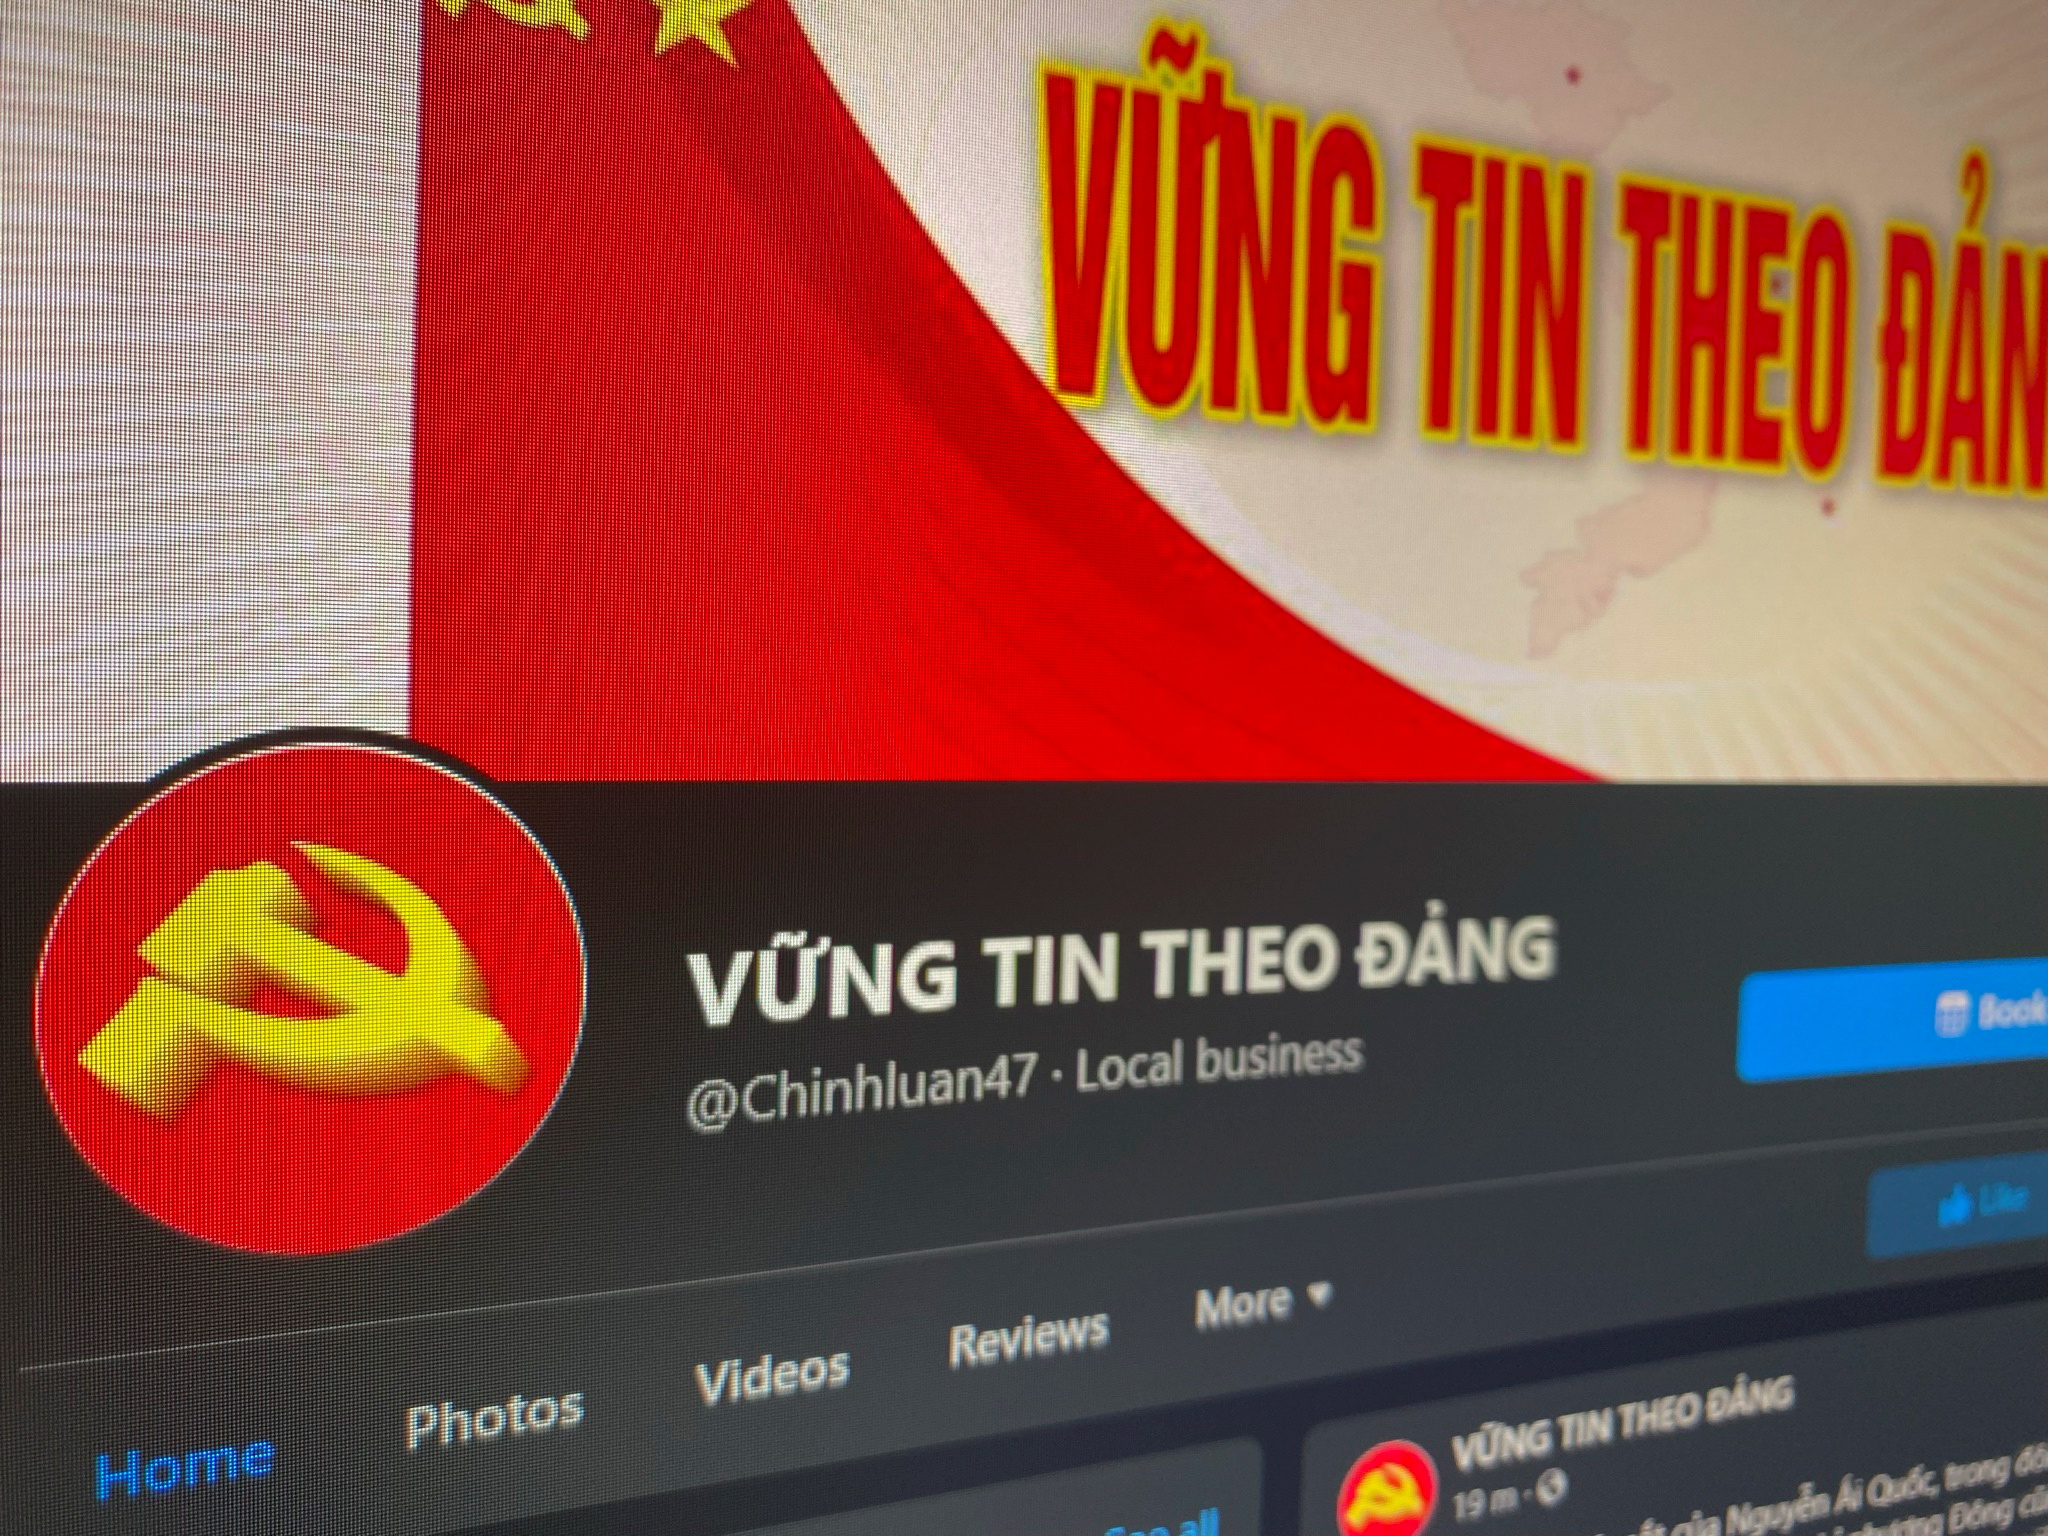 A Facebook page of a group called 'Believe in the Party' which was identified by Vietnamese state media as being controlled by 'Force 47' cyber troops, is displayed on screen in this photo taken July 6, 2021 by REUTERS